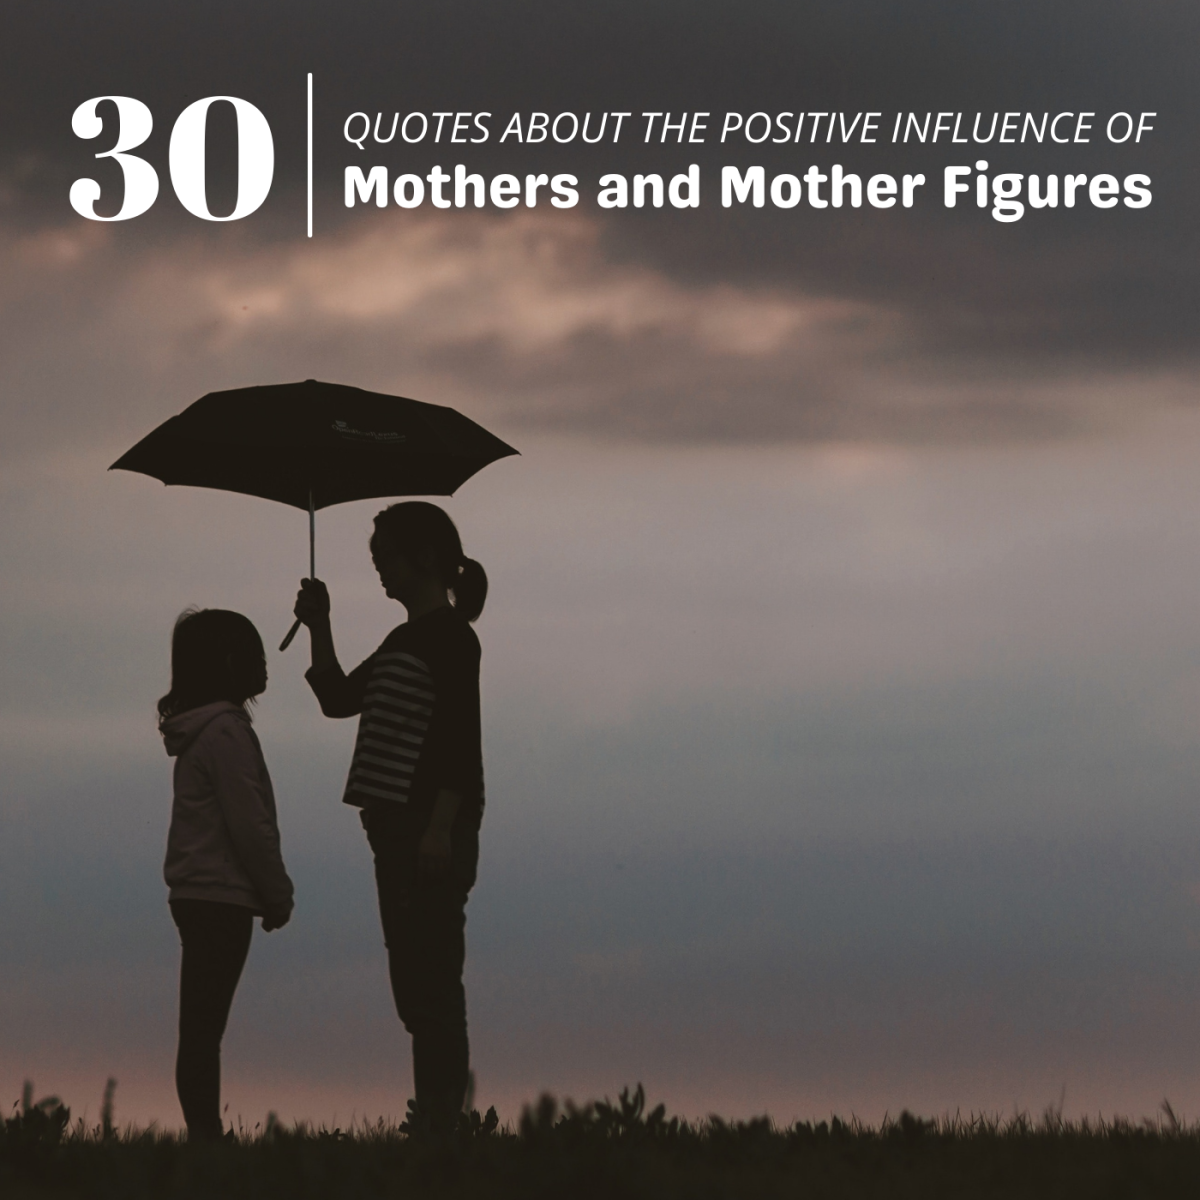 30 Positive Quotes About Mothers and Mother Figures